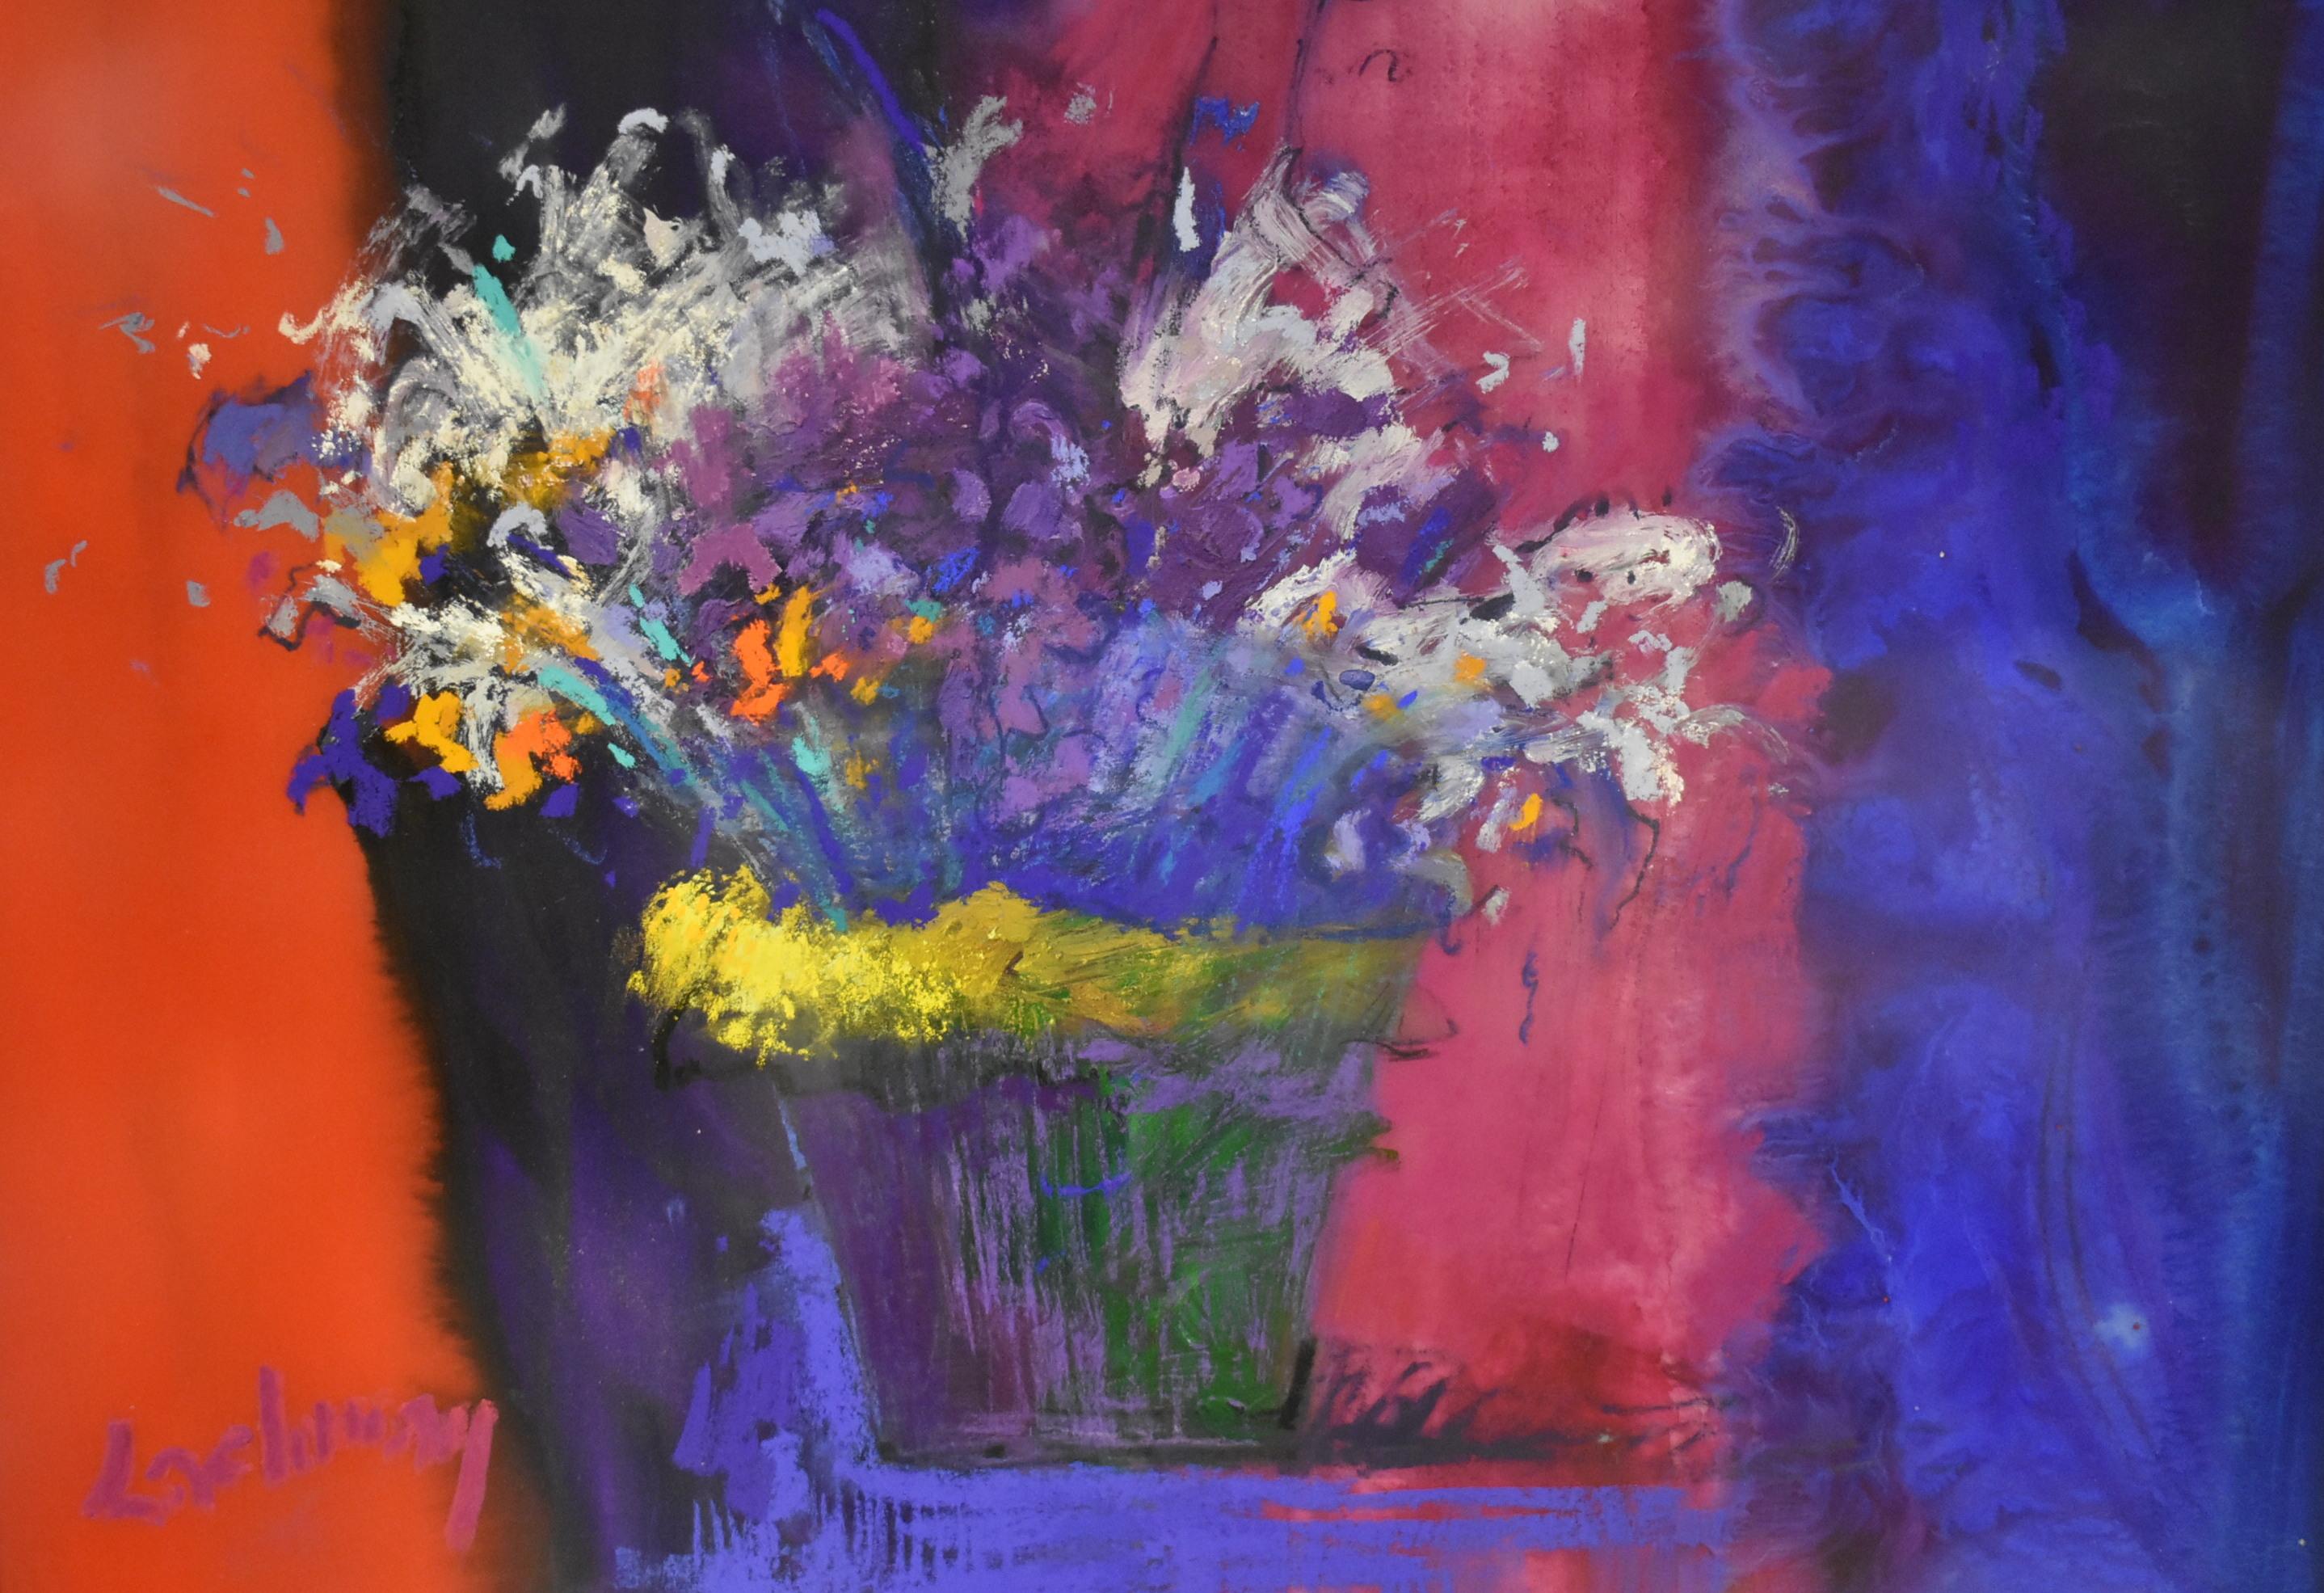 Modern impressionistic floral still life painting acrylic on paper by Al Lachman. Vibrant colors with nice technique. Signed lower right.